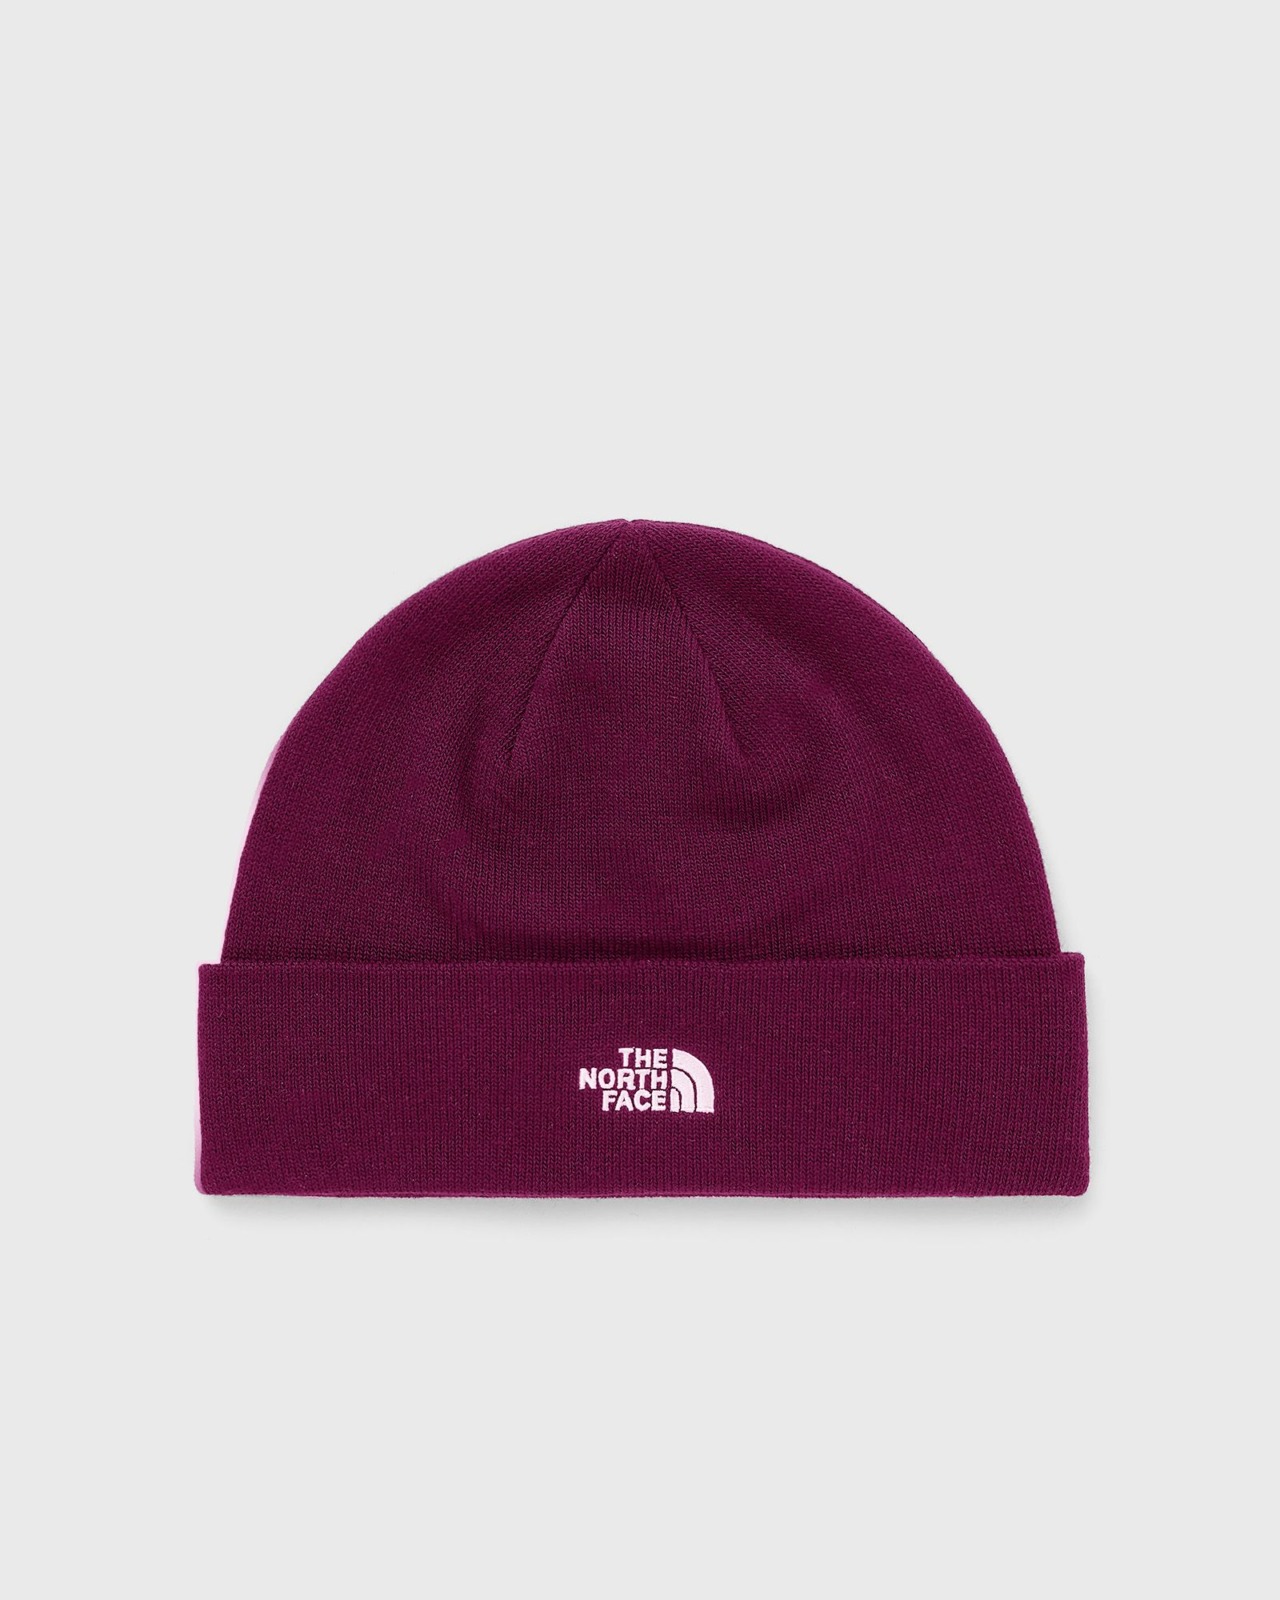 The North Face - Beanie Red Bstn Gents GOOFASH